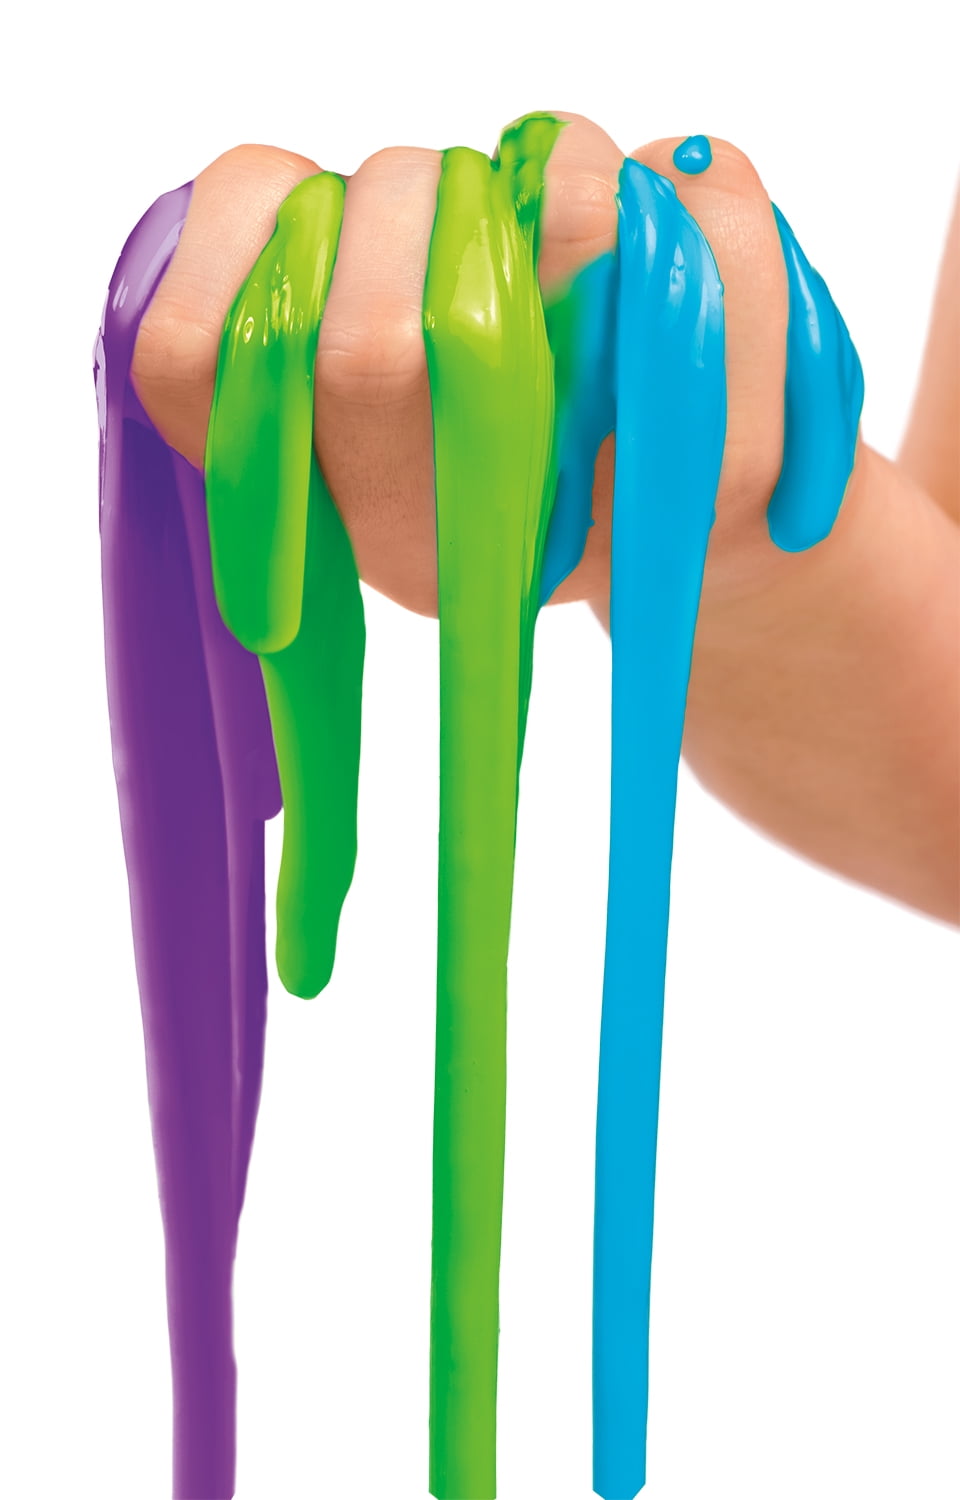 CRA-Z-ART Nickelodeon Slime 3lb Tri-color Bucket With 3 Colors in 1 for sale online 